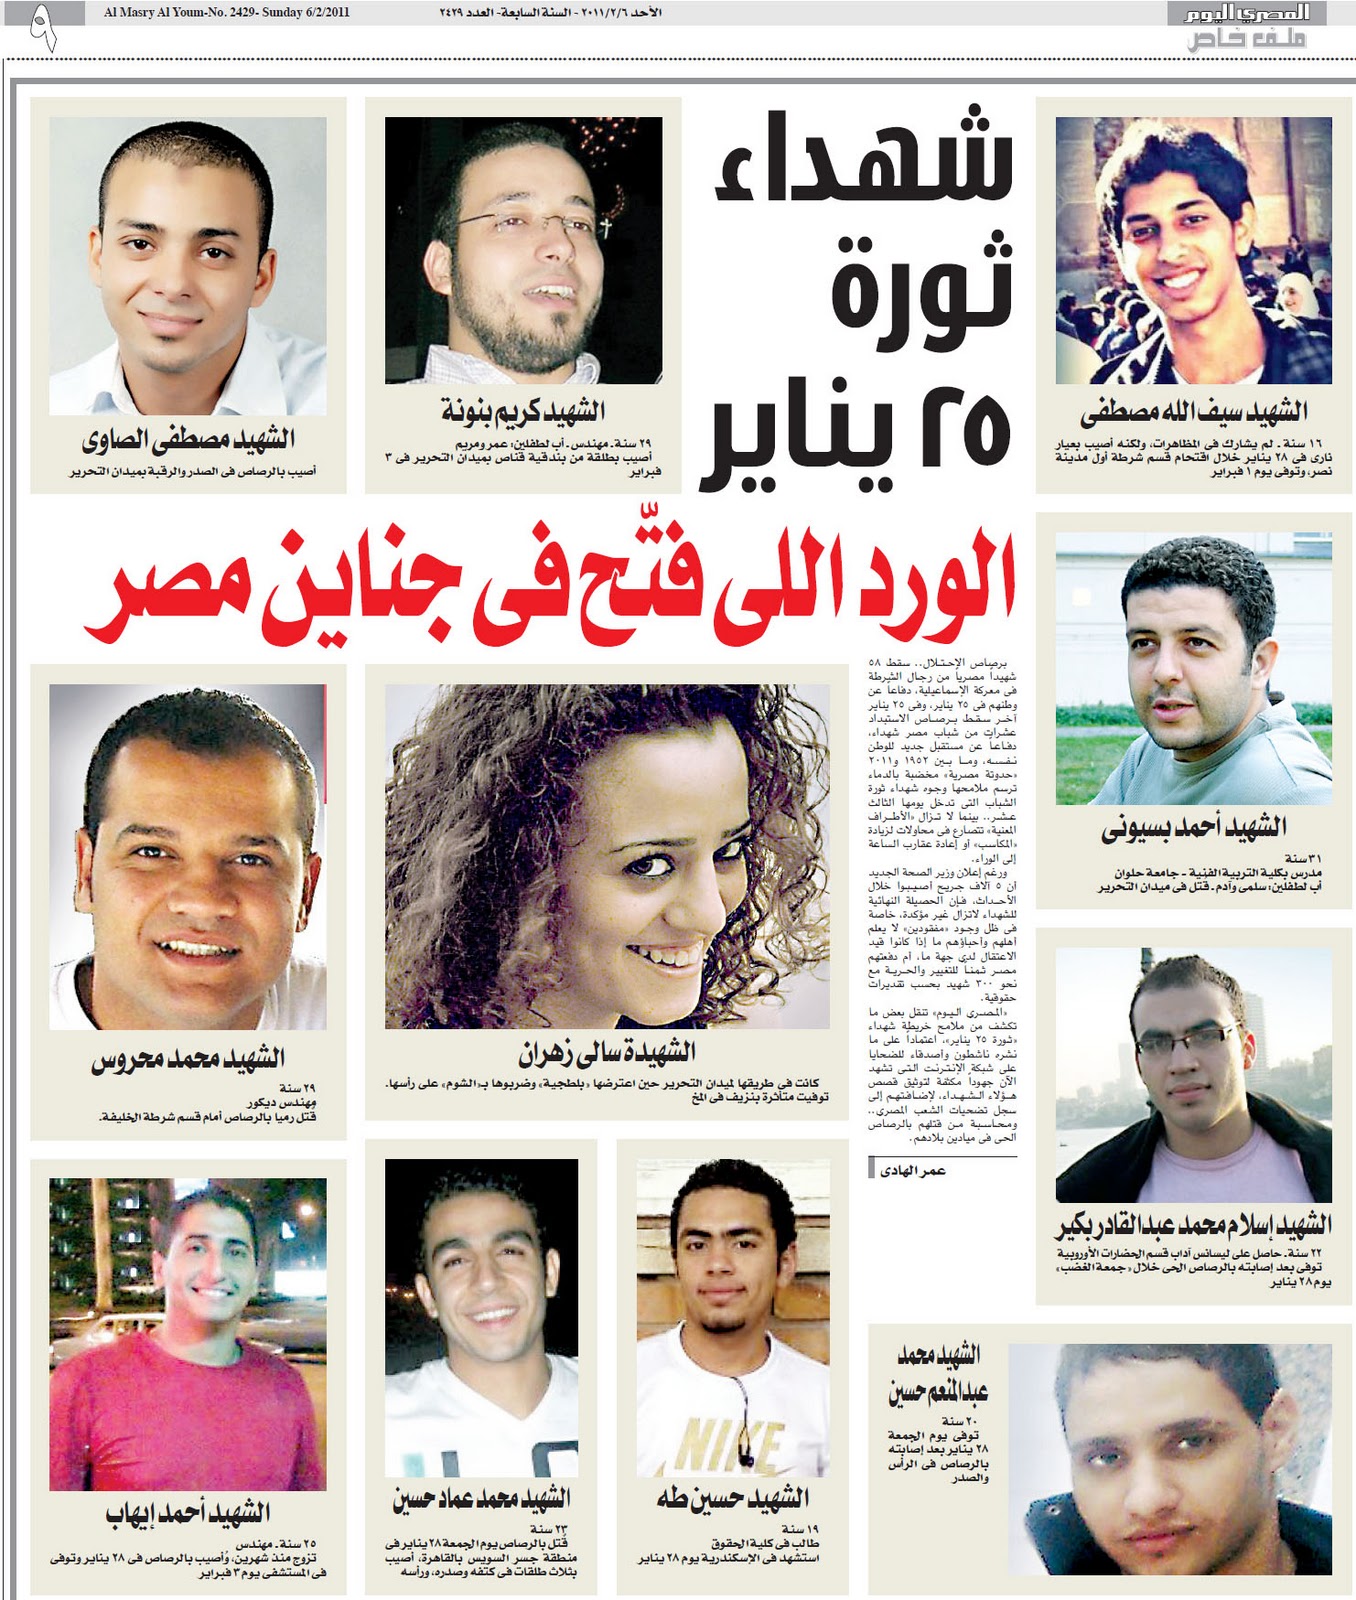 Thug casualties during the almost-failed Egyptian Coup d'État as reported on page 9 of the Egyptian daily Al-Masry Al-Yum, February 6, 2011.